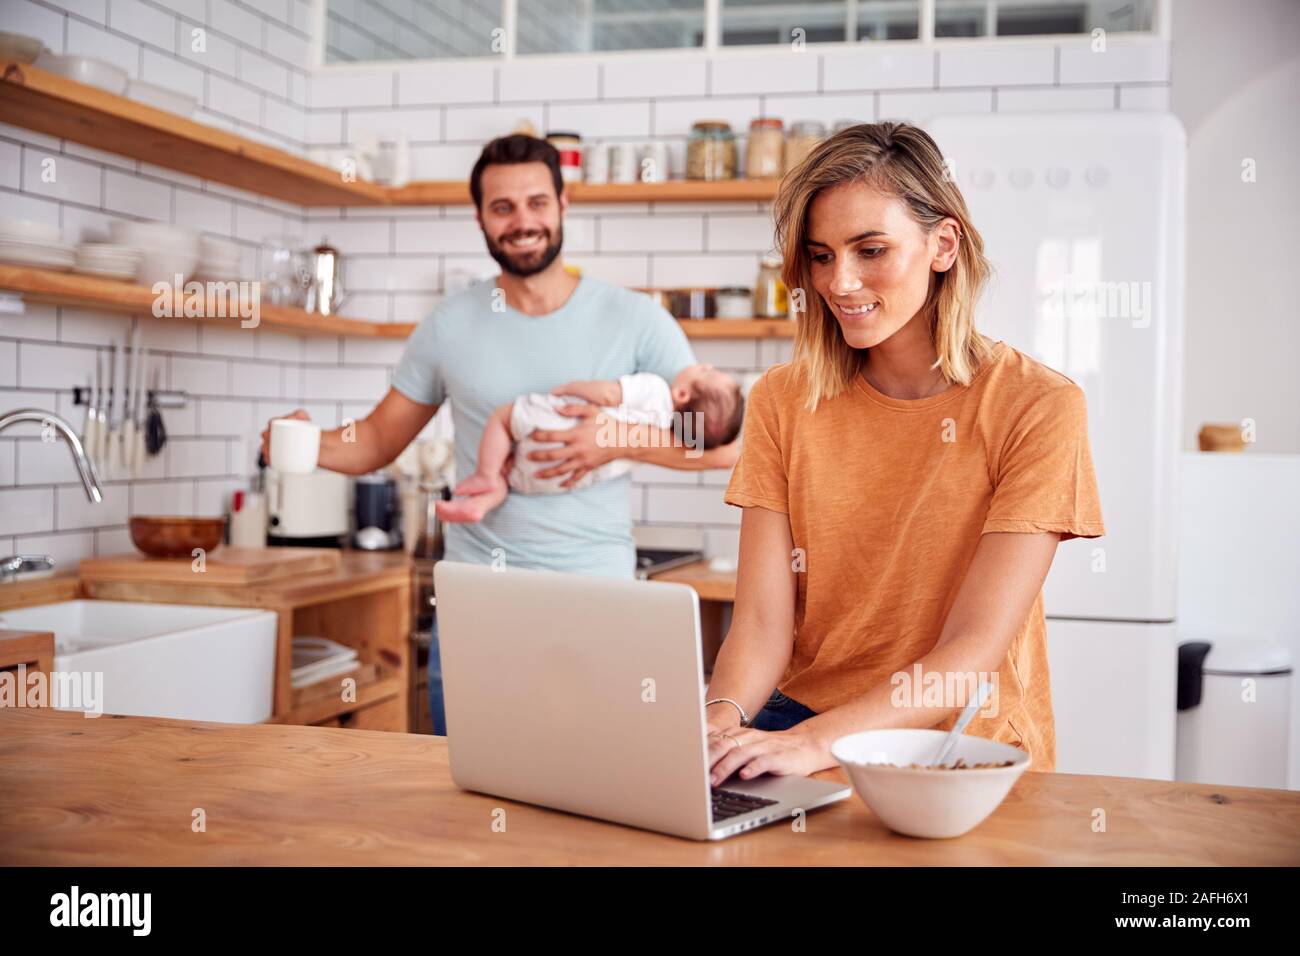 Multi-Tasking Father Holds Baby Son And Makes Hot Drink As Mother Uses Laptop And Eats Breakfast Stock Photo